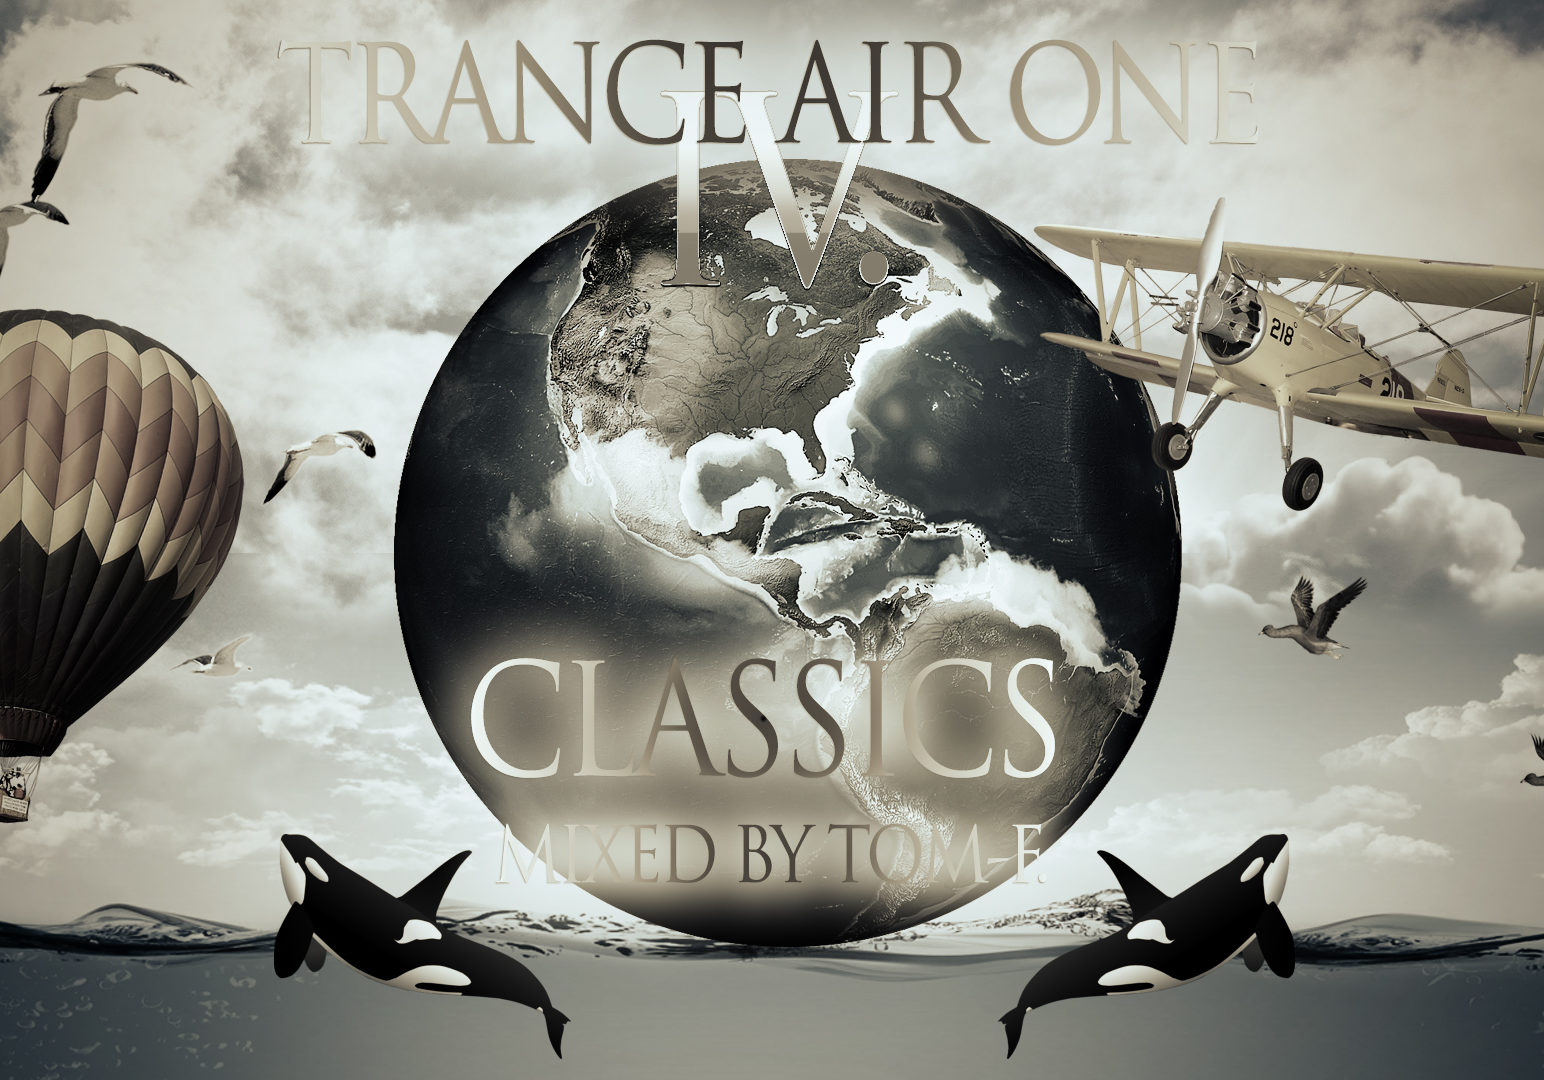 Trance Air One 4. - Classics mixed by Tom-F